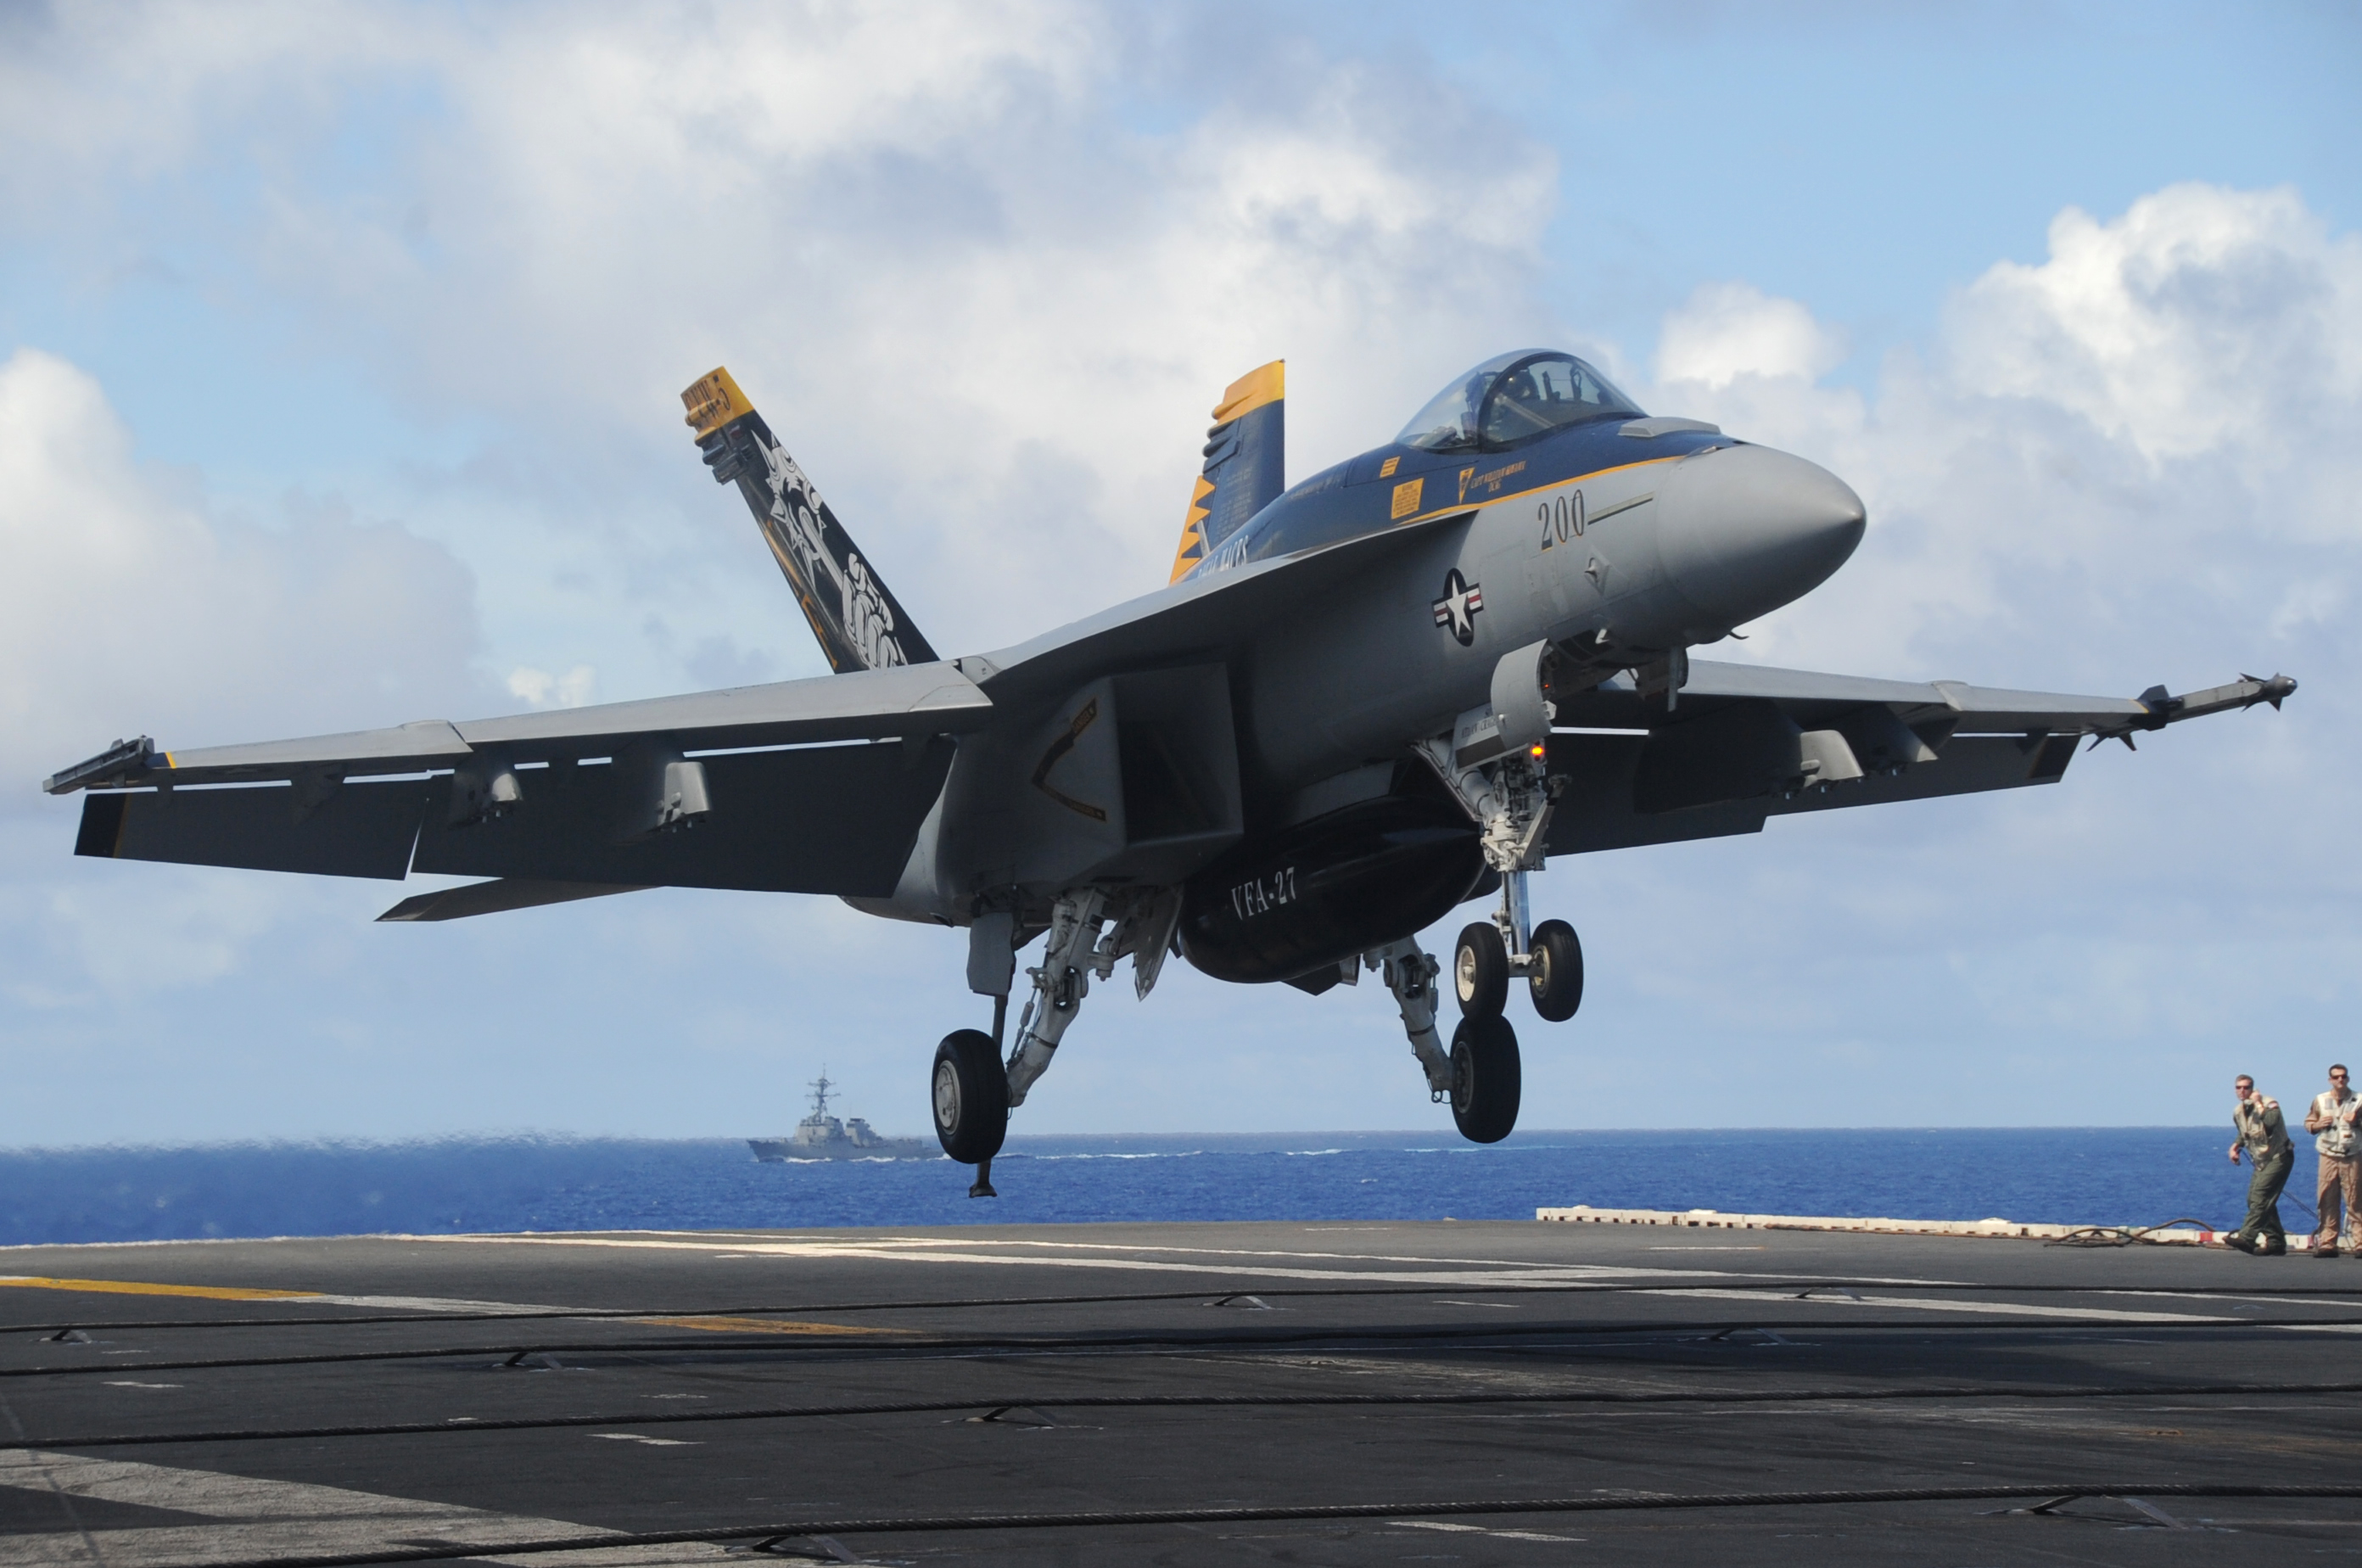 U.S._Navy_F-A-18E_Super_Hornet_aircraft_assigned_to_Strike_Fighter_Squadron_%28VFA%29_115_makes_an_arrested_landing_on_the_flight_deck_of_the_aircraft_carrier_USS_George_Washington_%28CVN_73%29_Aug._20%2C_2013%2C_while_130820-N-GC965-276.jpg